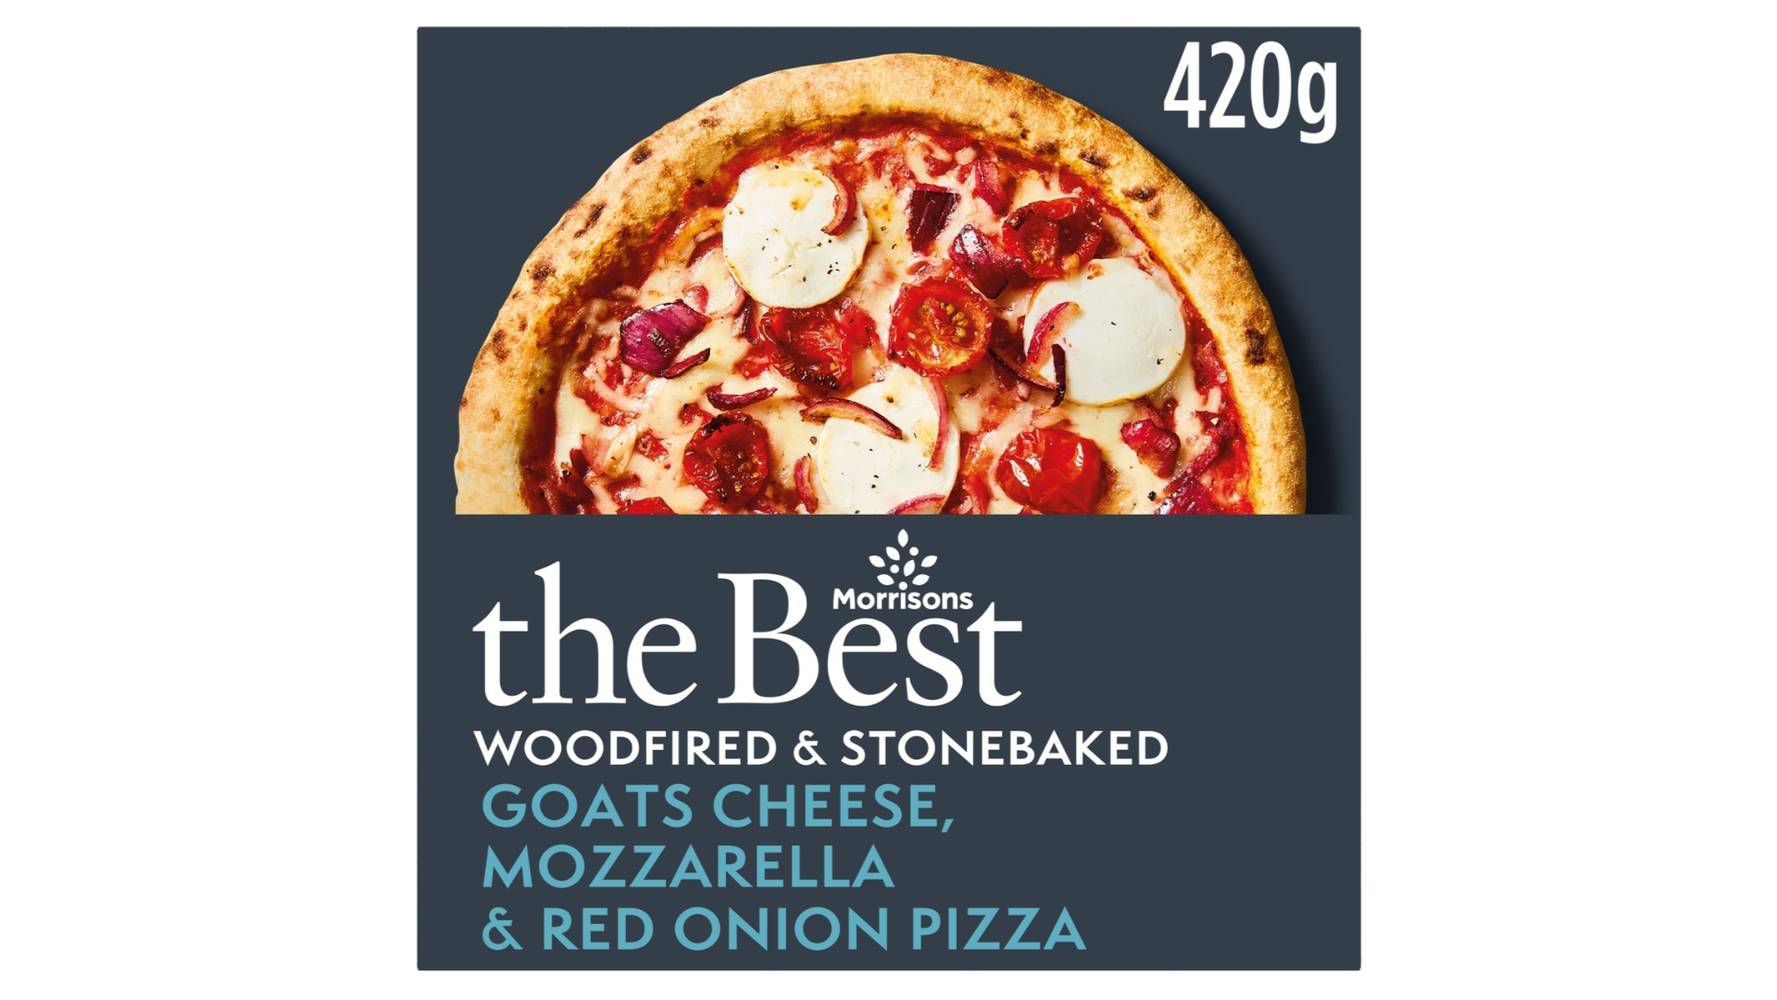 Morrisons Goats Cheese & Red Onion Pizza 420g